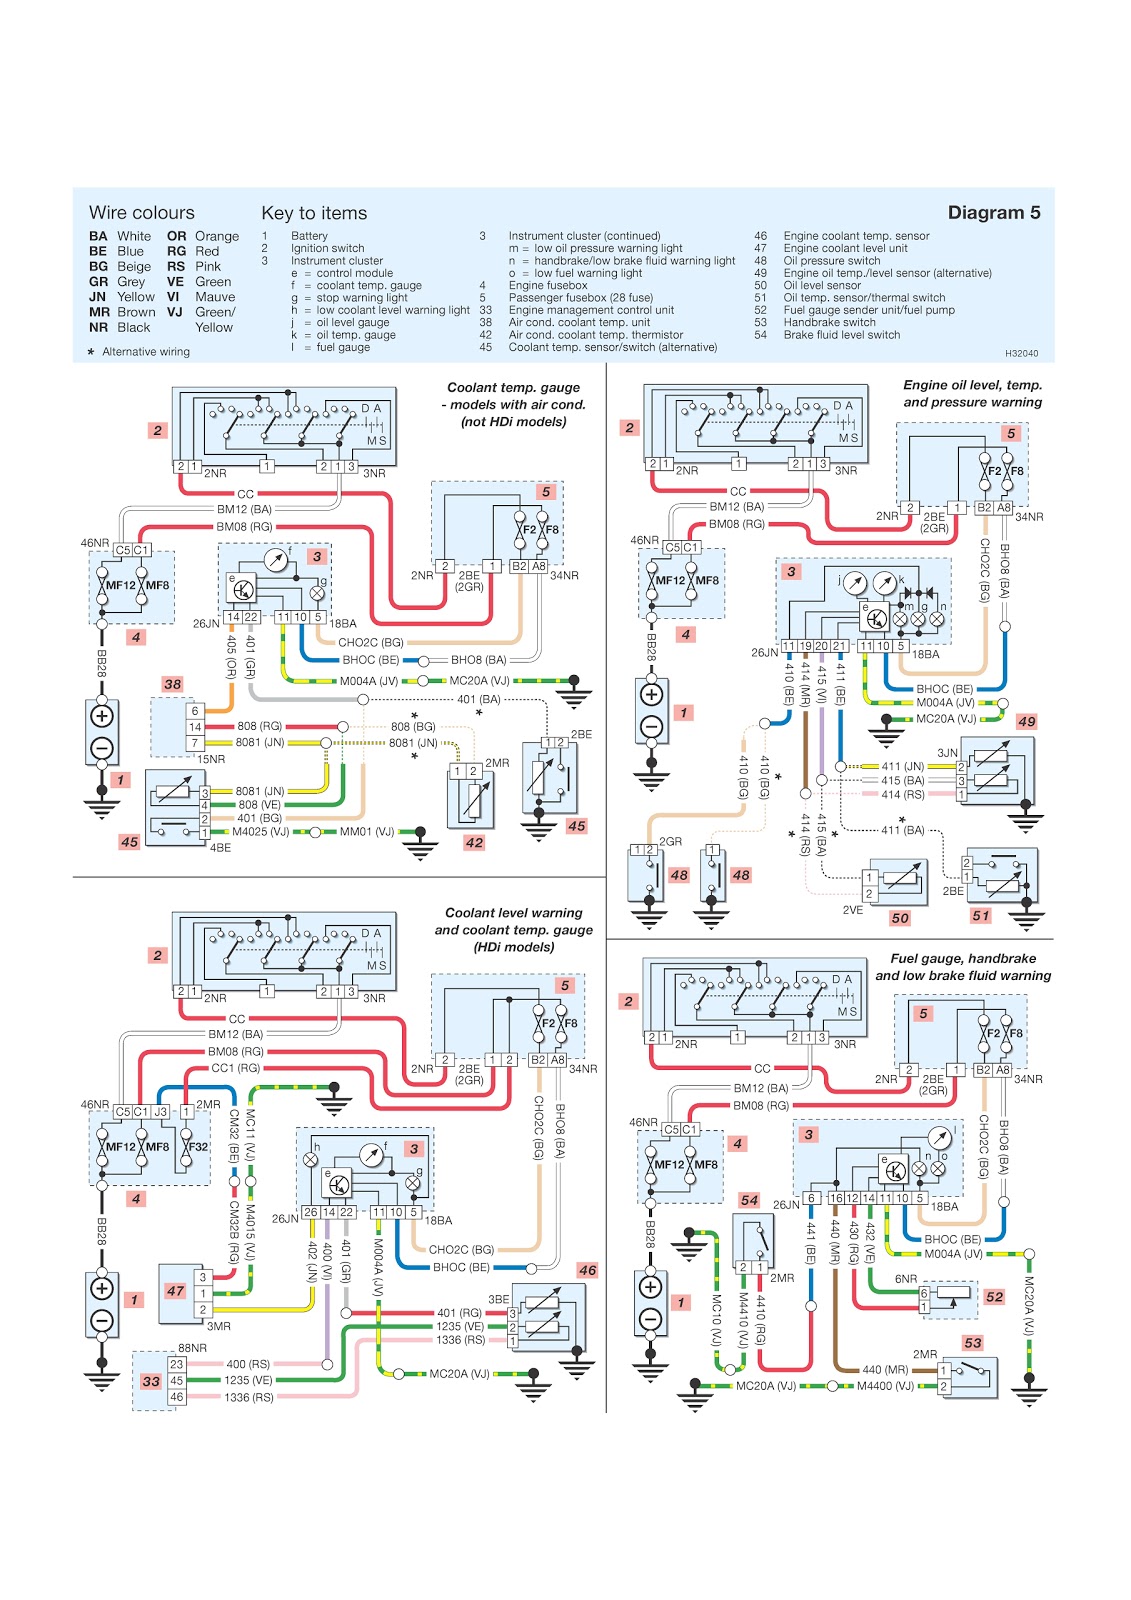 Peugeot 206 System Wiring Diagrams Warning Lights and ... peugeot 206 aircon wiring diagram 